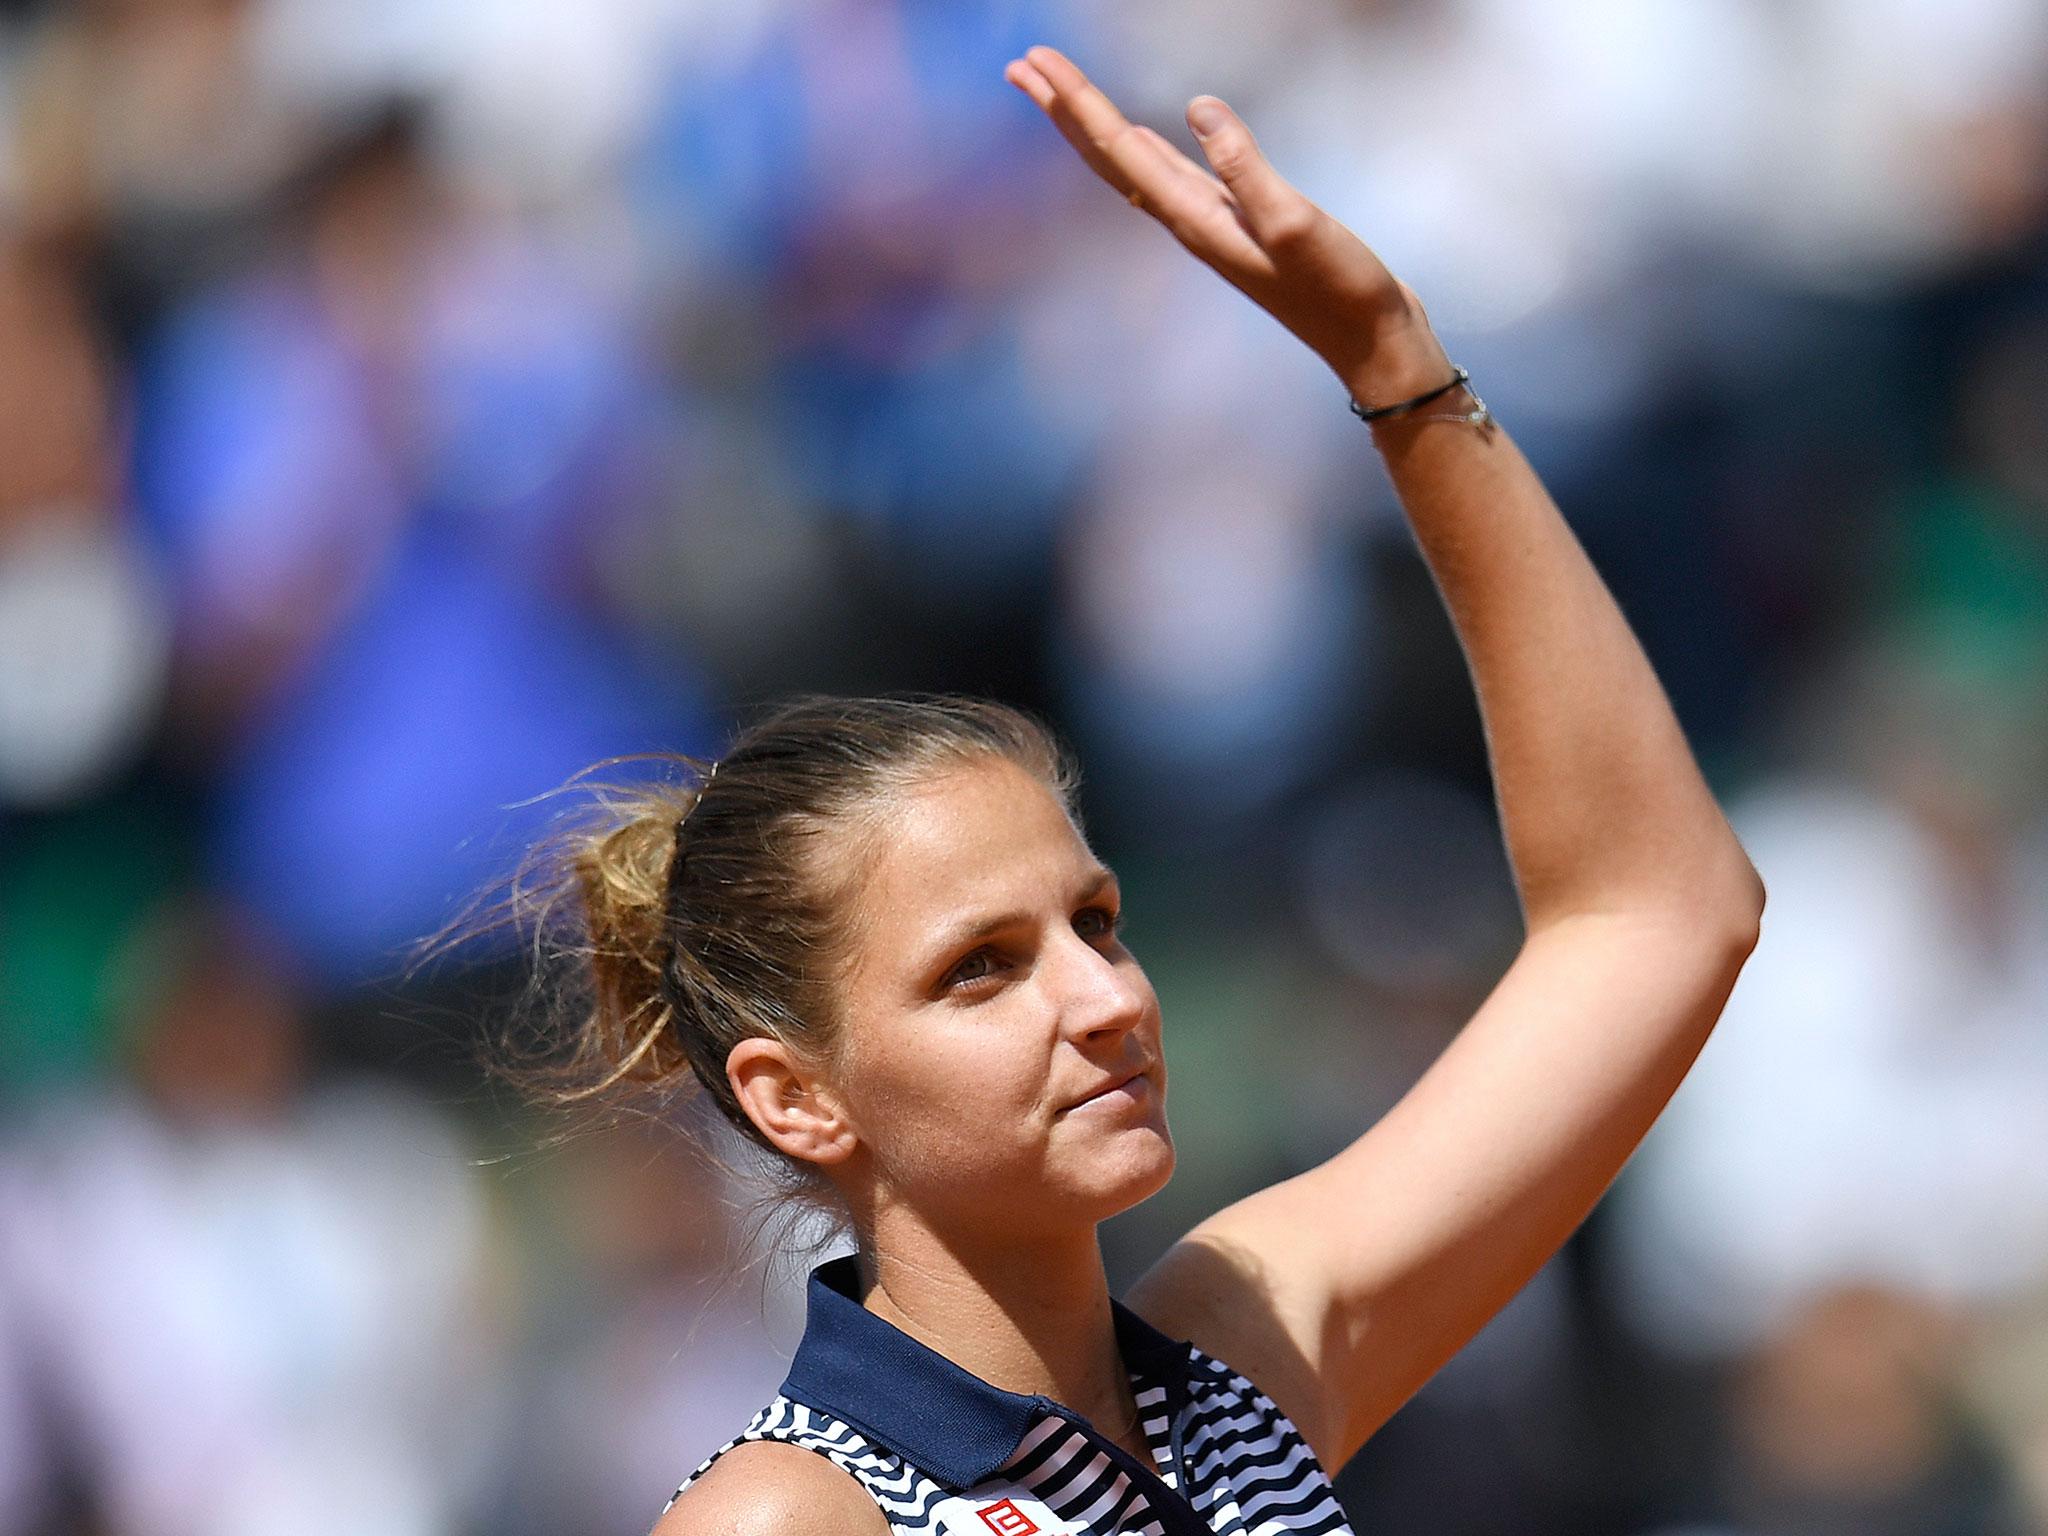 Since last July Pliskova has won titles in Cincinnati, Brisbane and Doha and performed consistently at Grand Slam level